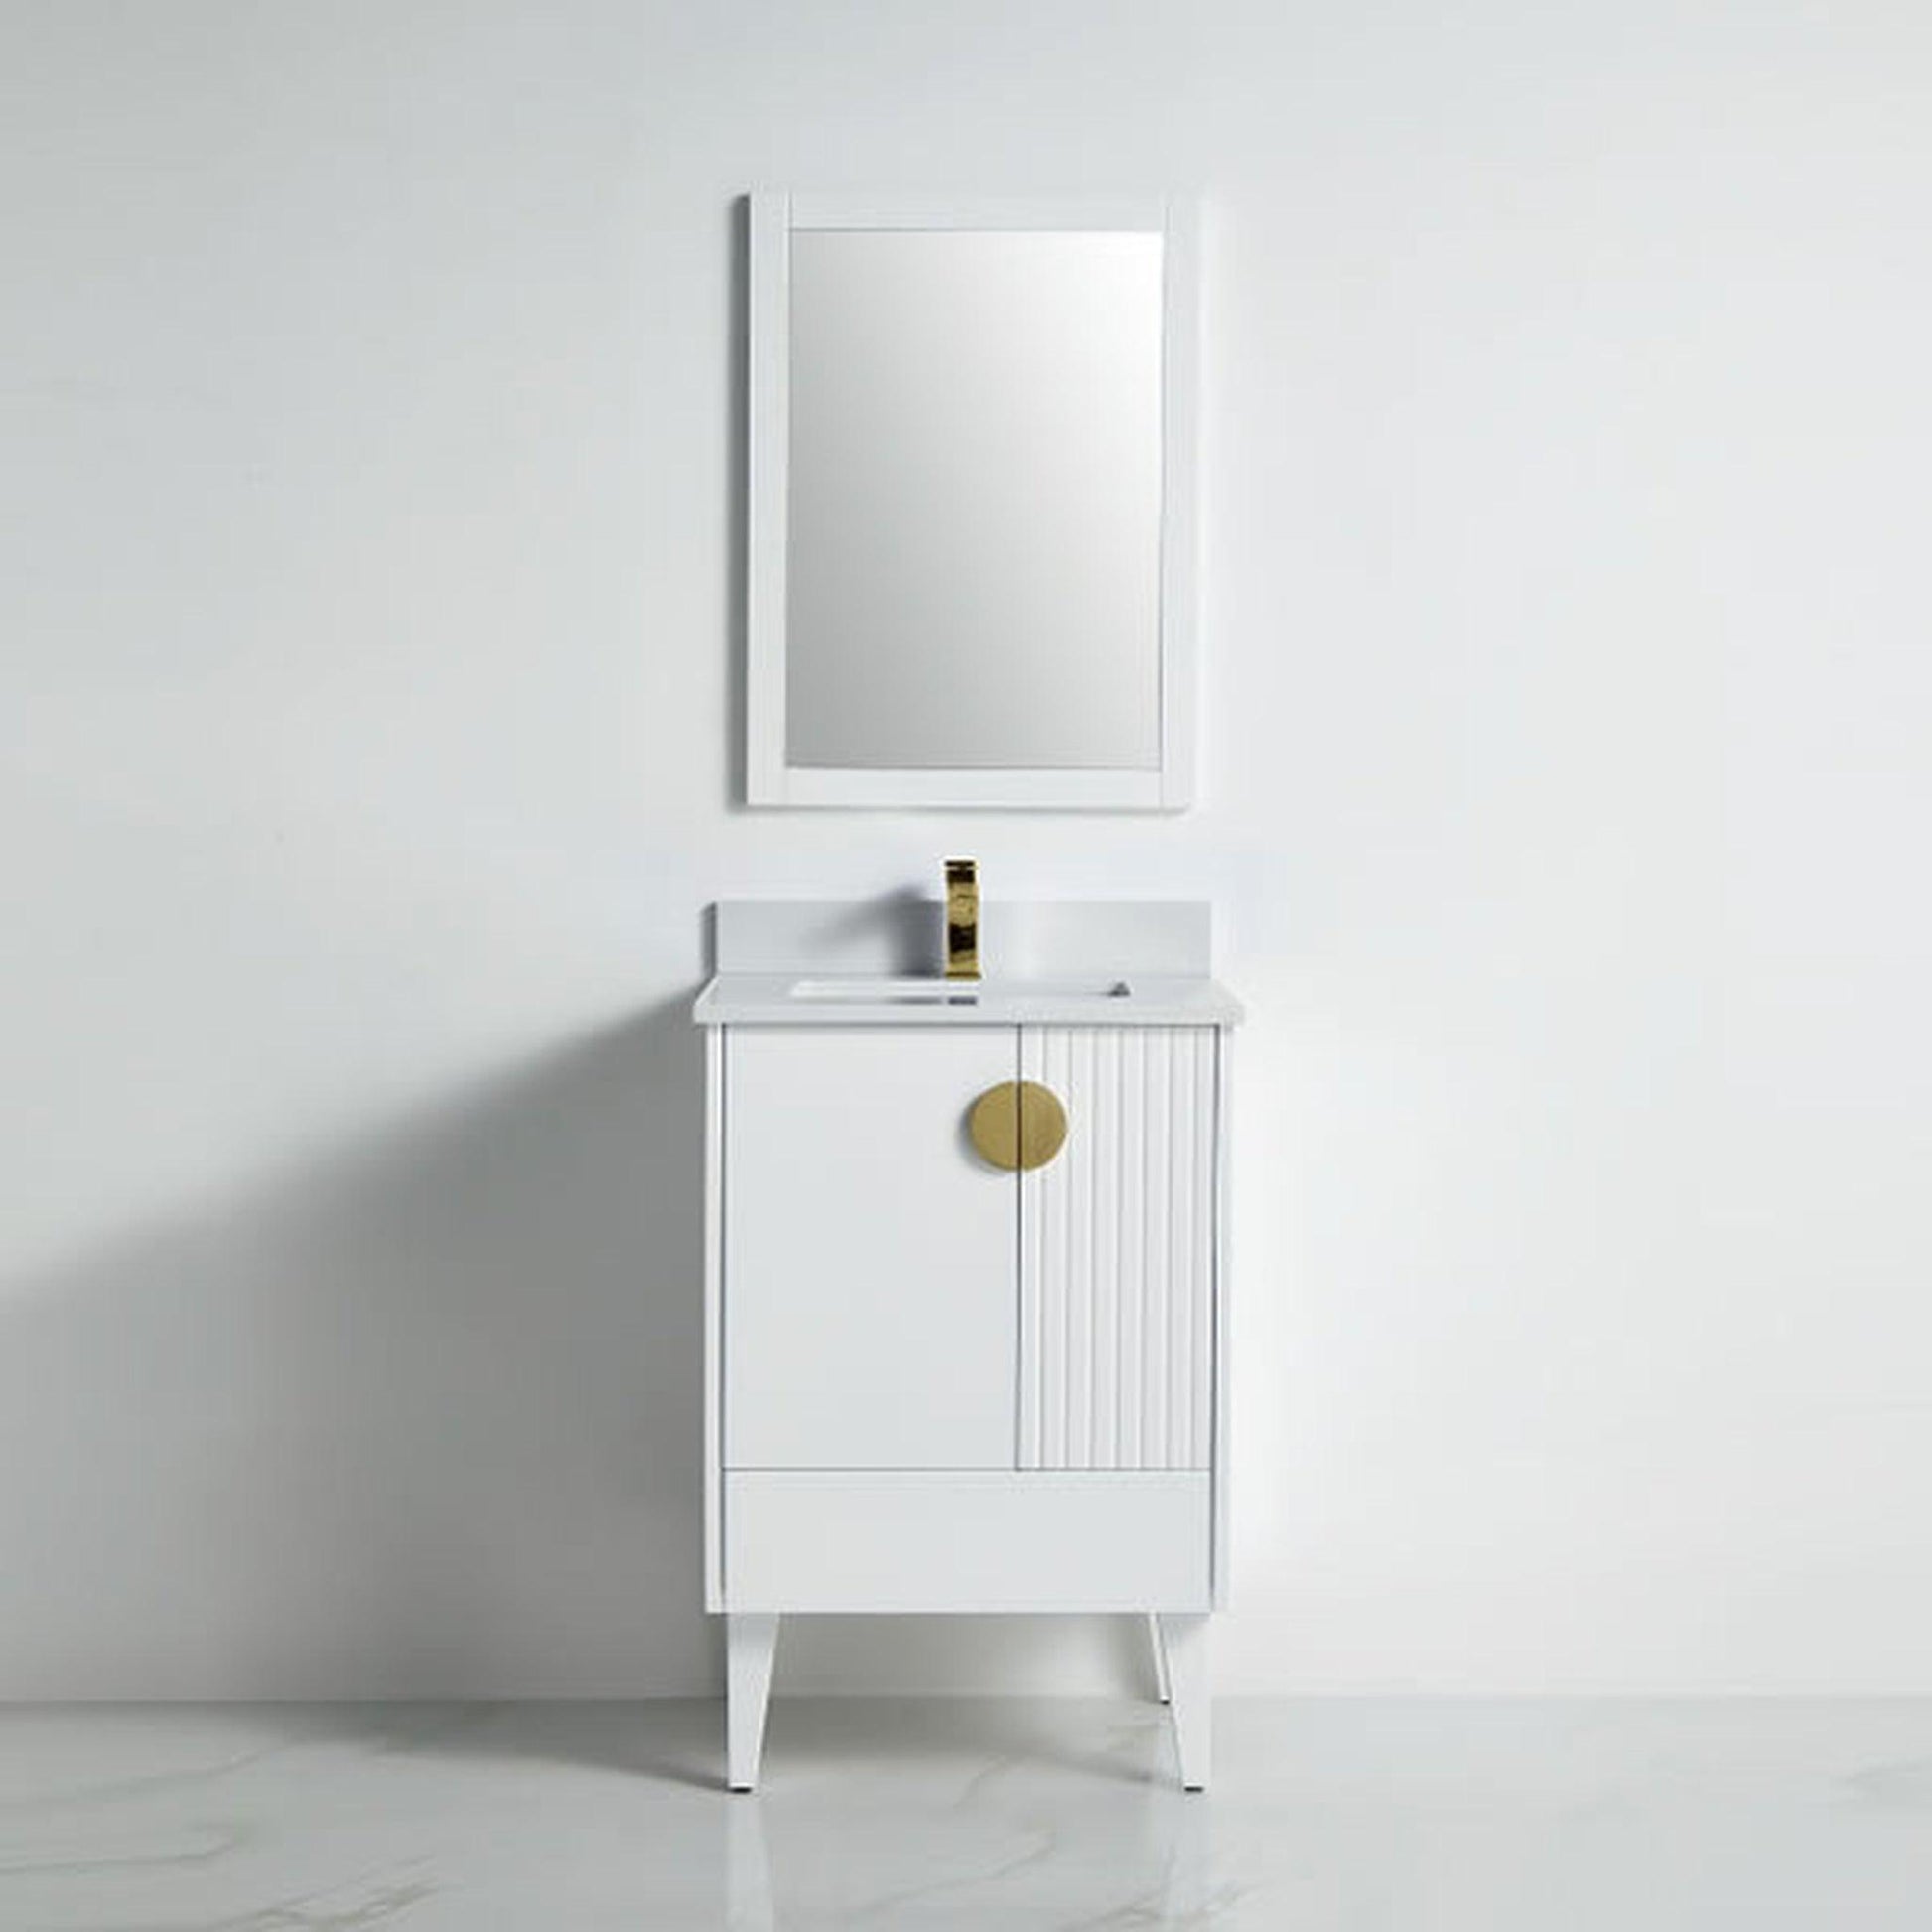 BNK BCB1424WH Athens Matt White Vanity Only Two Glass Door One Drawer Soft Close